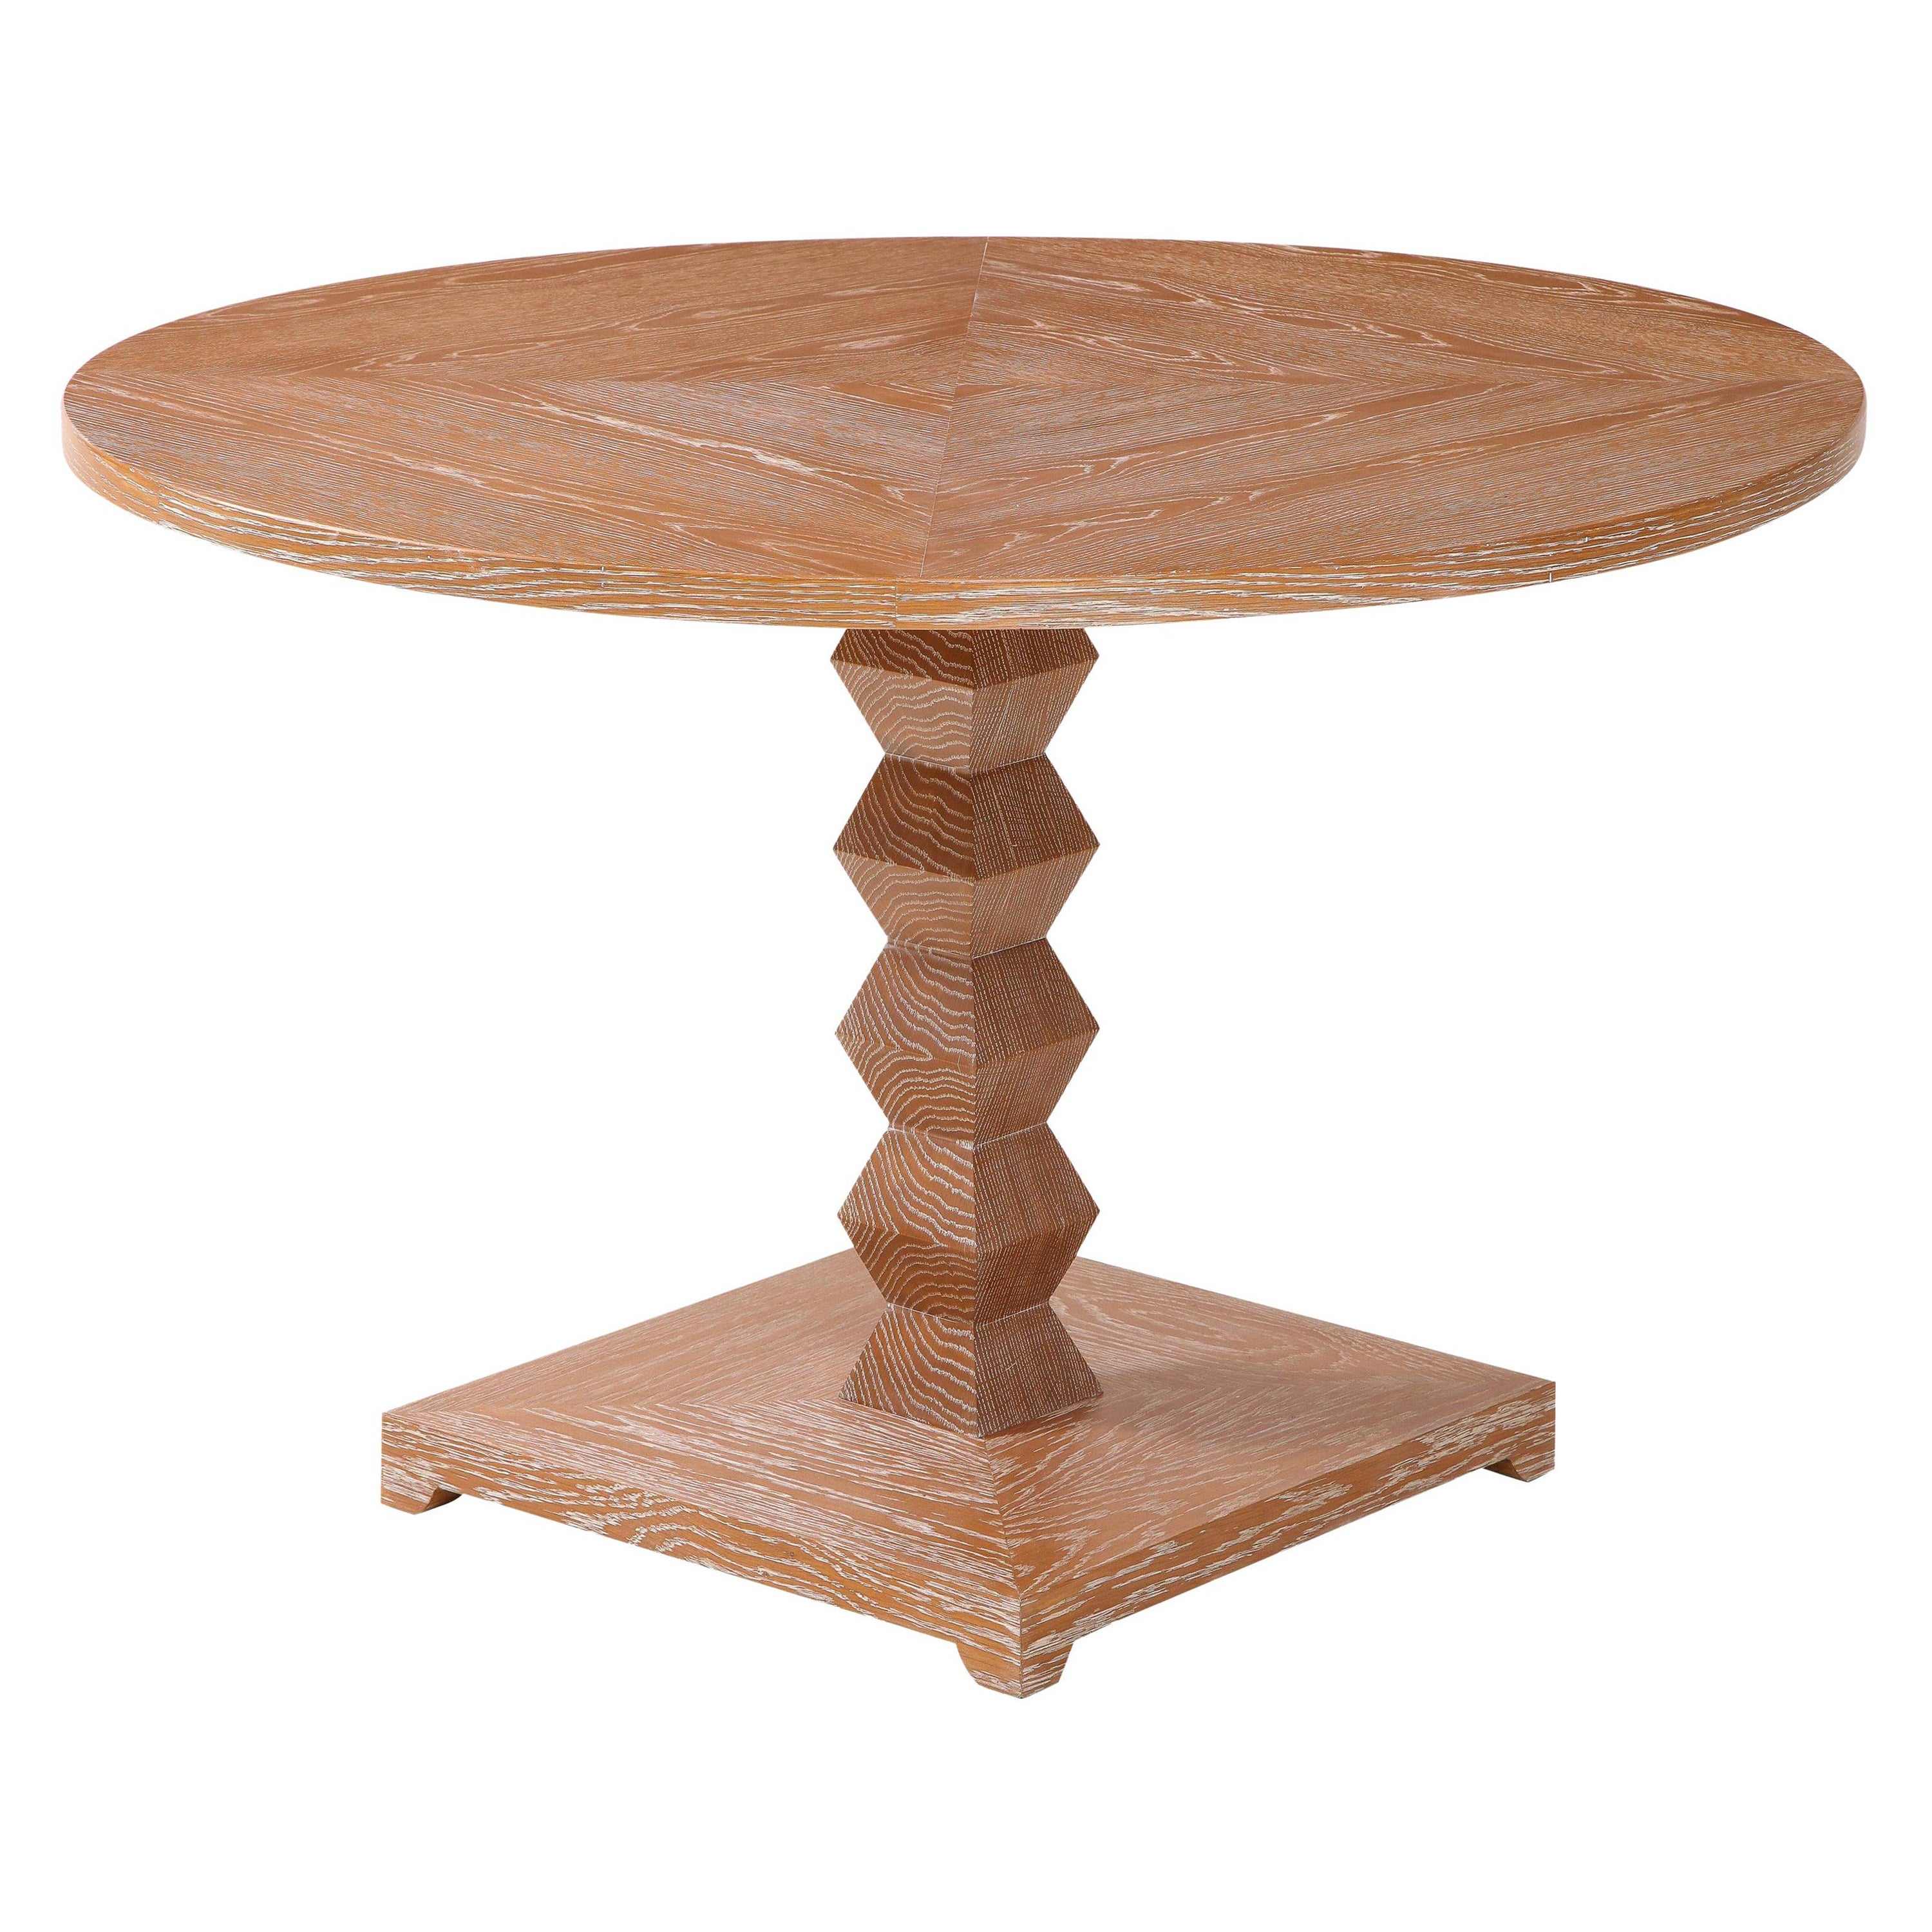 Custom Cerused Oak Center Table Inspired by French, 1940s Design For Sale